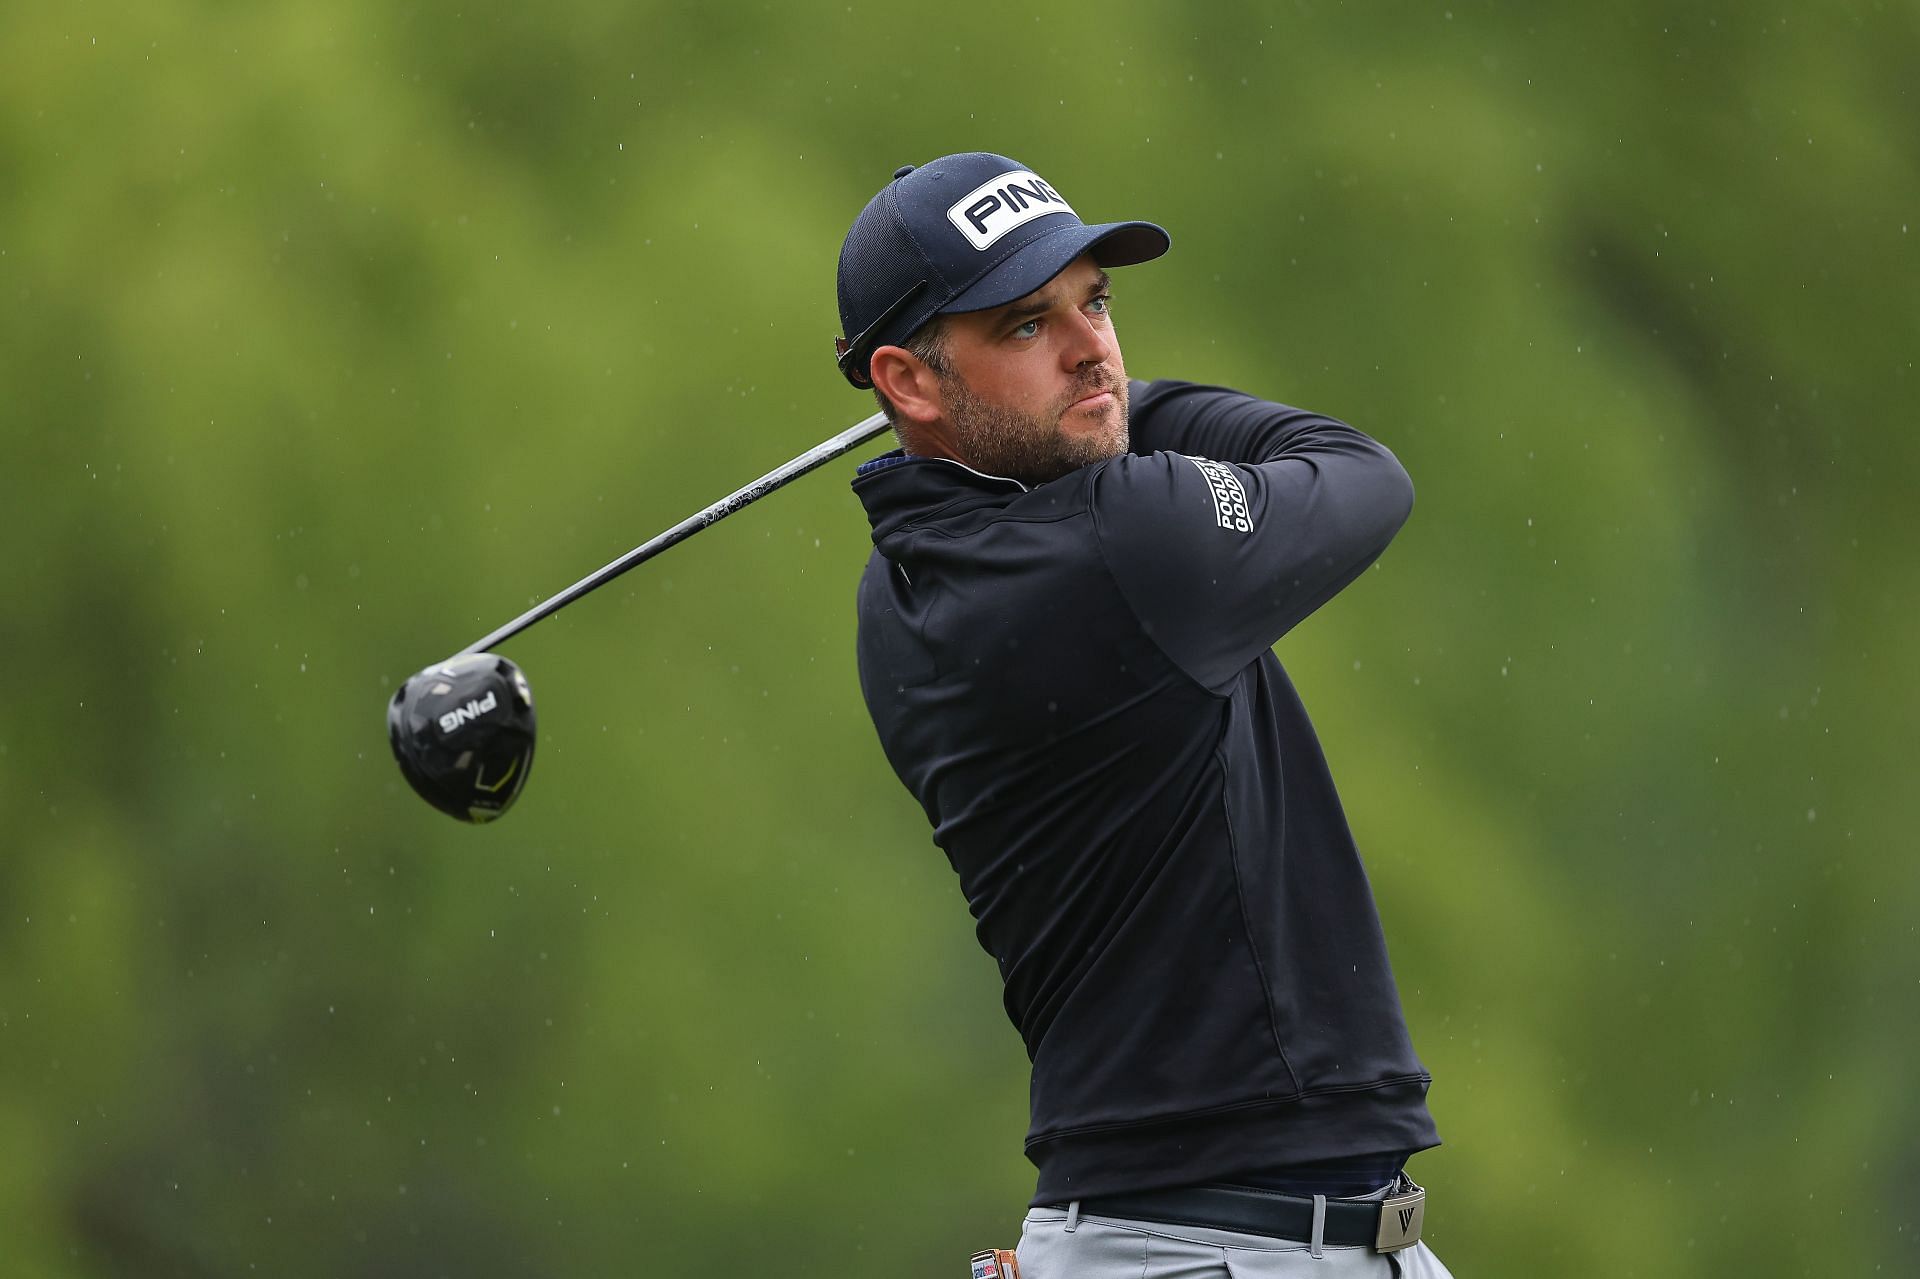 Correy Conners topped the leaderboard after two rounds at the 2023 PGA Championship